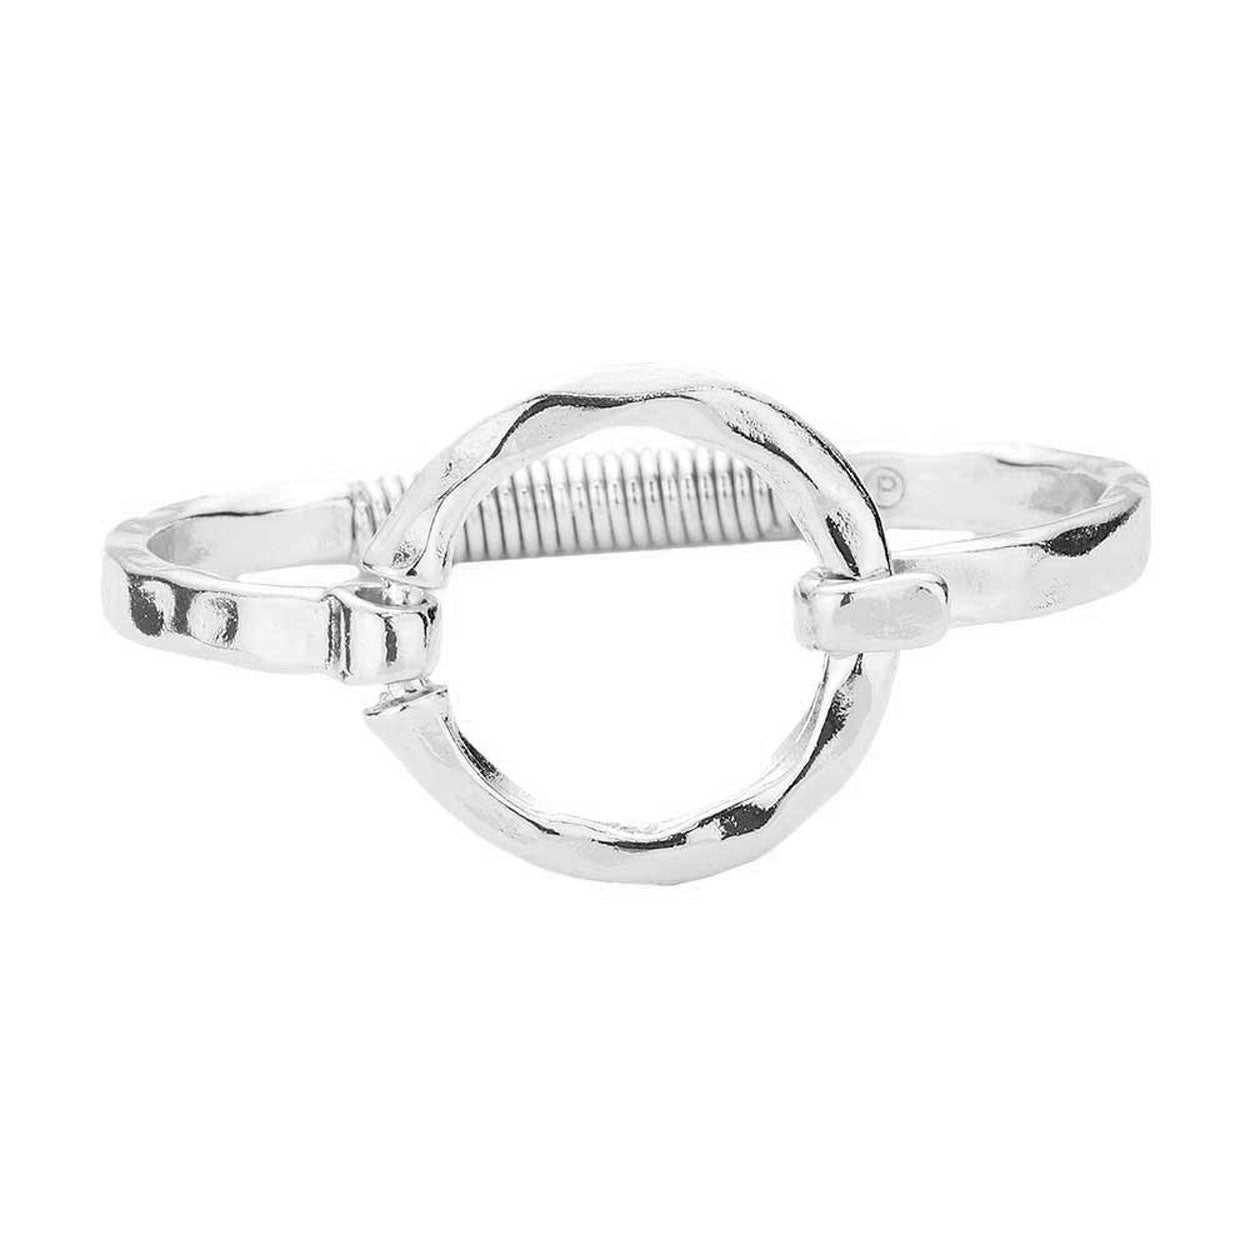 Rhodium Hammered Open Metal Circle Hook Bracelet. These metal circle hook bracelets are easy to put on, take off and so comfortable for daily wear. Pair these with tee and jeans and you are good to go. . Perfect Birthday gift, friendship day, Mother's Day, Graduation Gift or any other Special occasion.